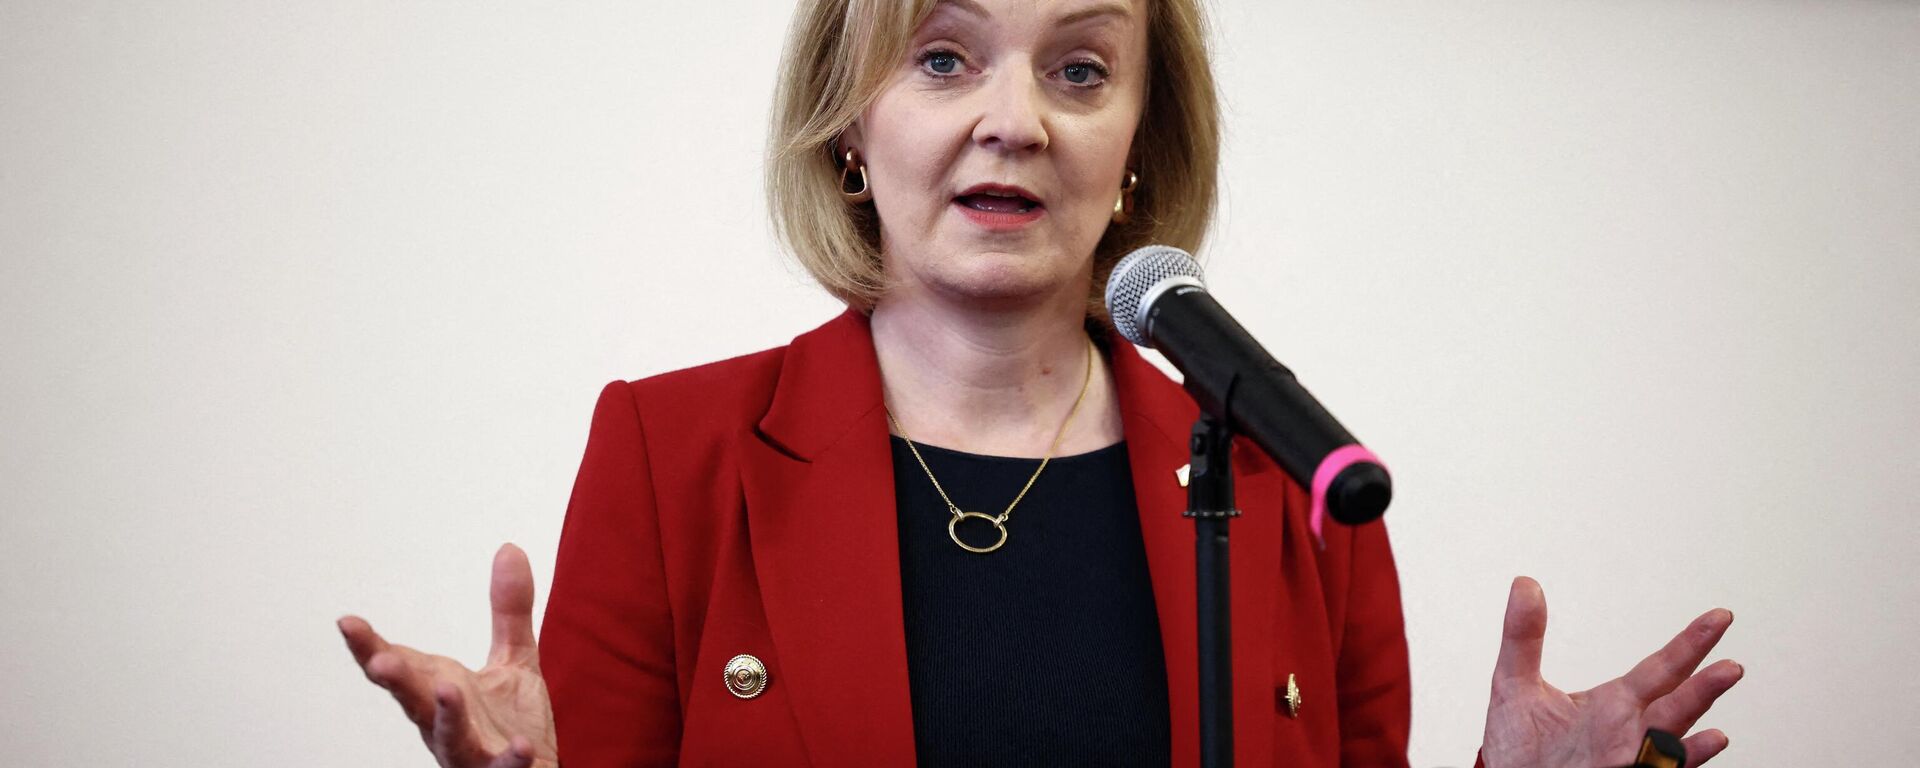 Contender to become the country's next Prime minister and leader of the Conservative party British Foreign Secretary Liz Truss delivers a speech during a campaign event in Leeds, on July 28, 2022 - Sputnik International, 1920, 25.08.2022